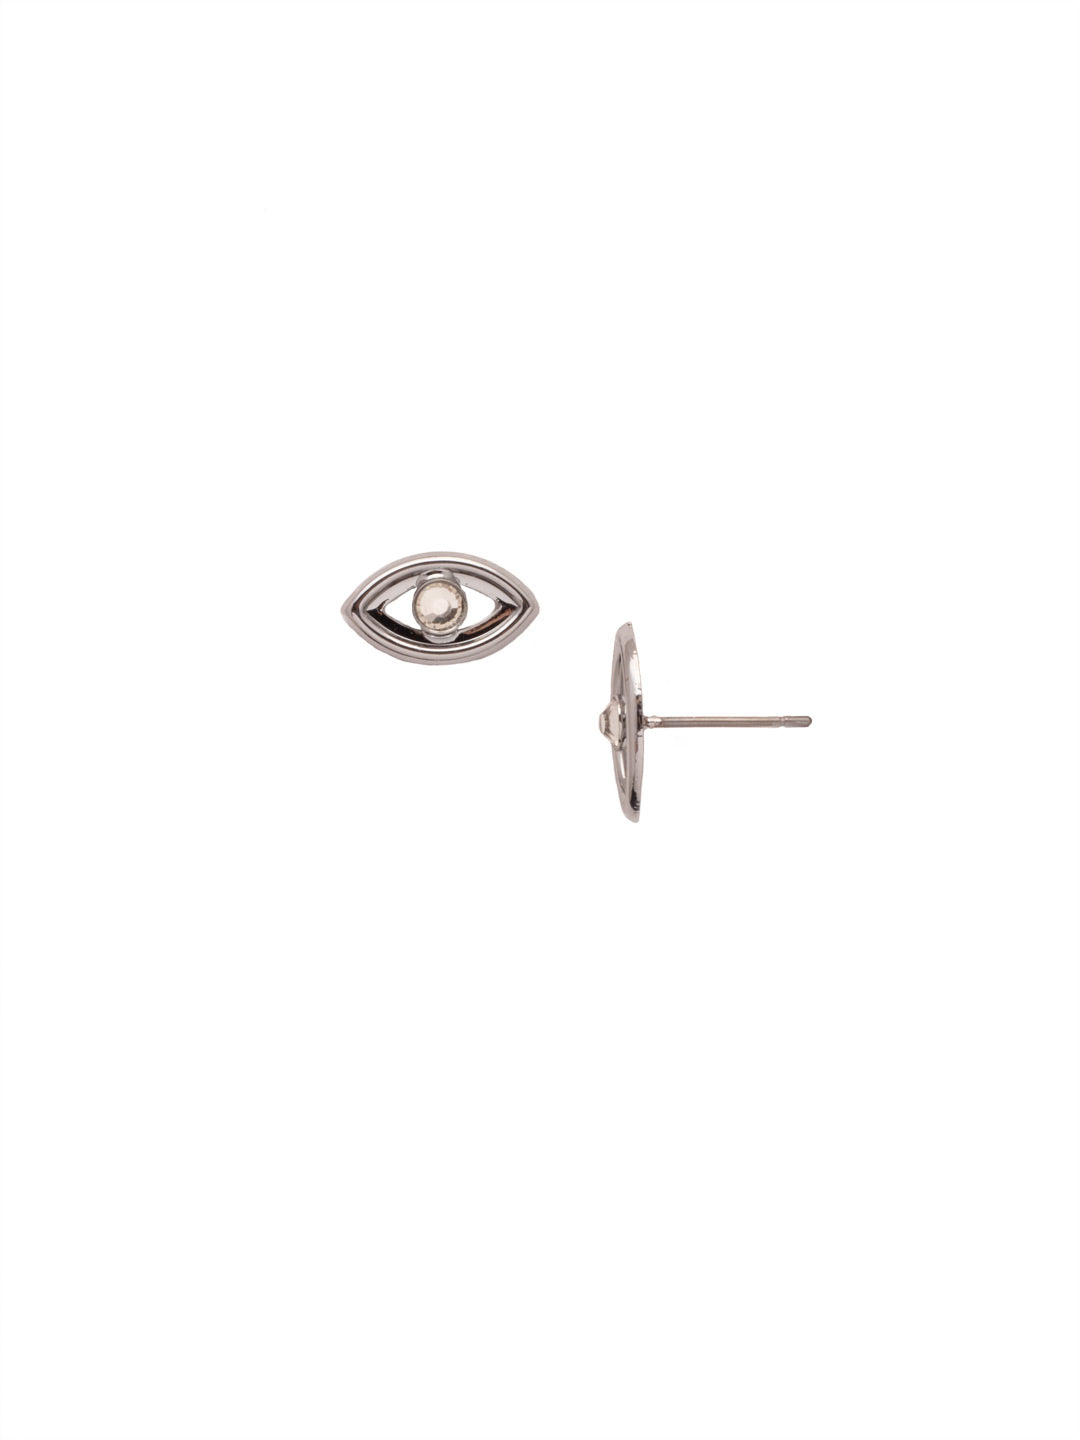 Evil Eye Stud Earring - EEV66PDCRY - <p>Our Evil Eye Stud Earrings are simple must-haves for lovers of the symbol. Just fasten them on and go. They're great pieces to add to a casual wear day. From Sorrelli's Crystal collection in our Palladium finish.</p>